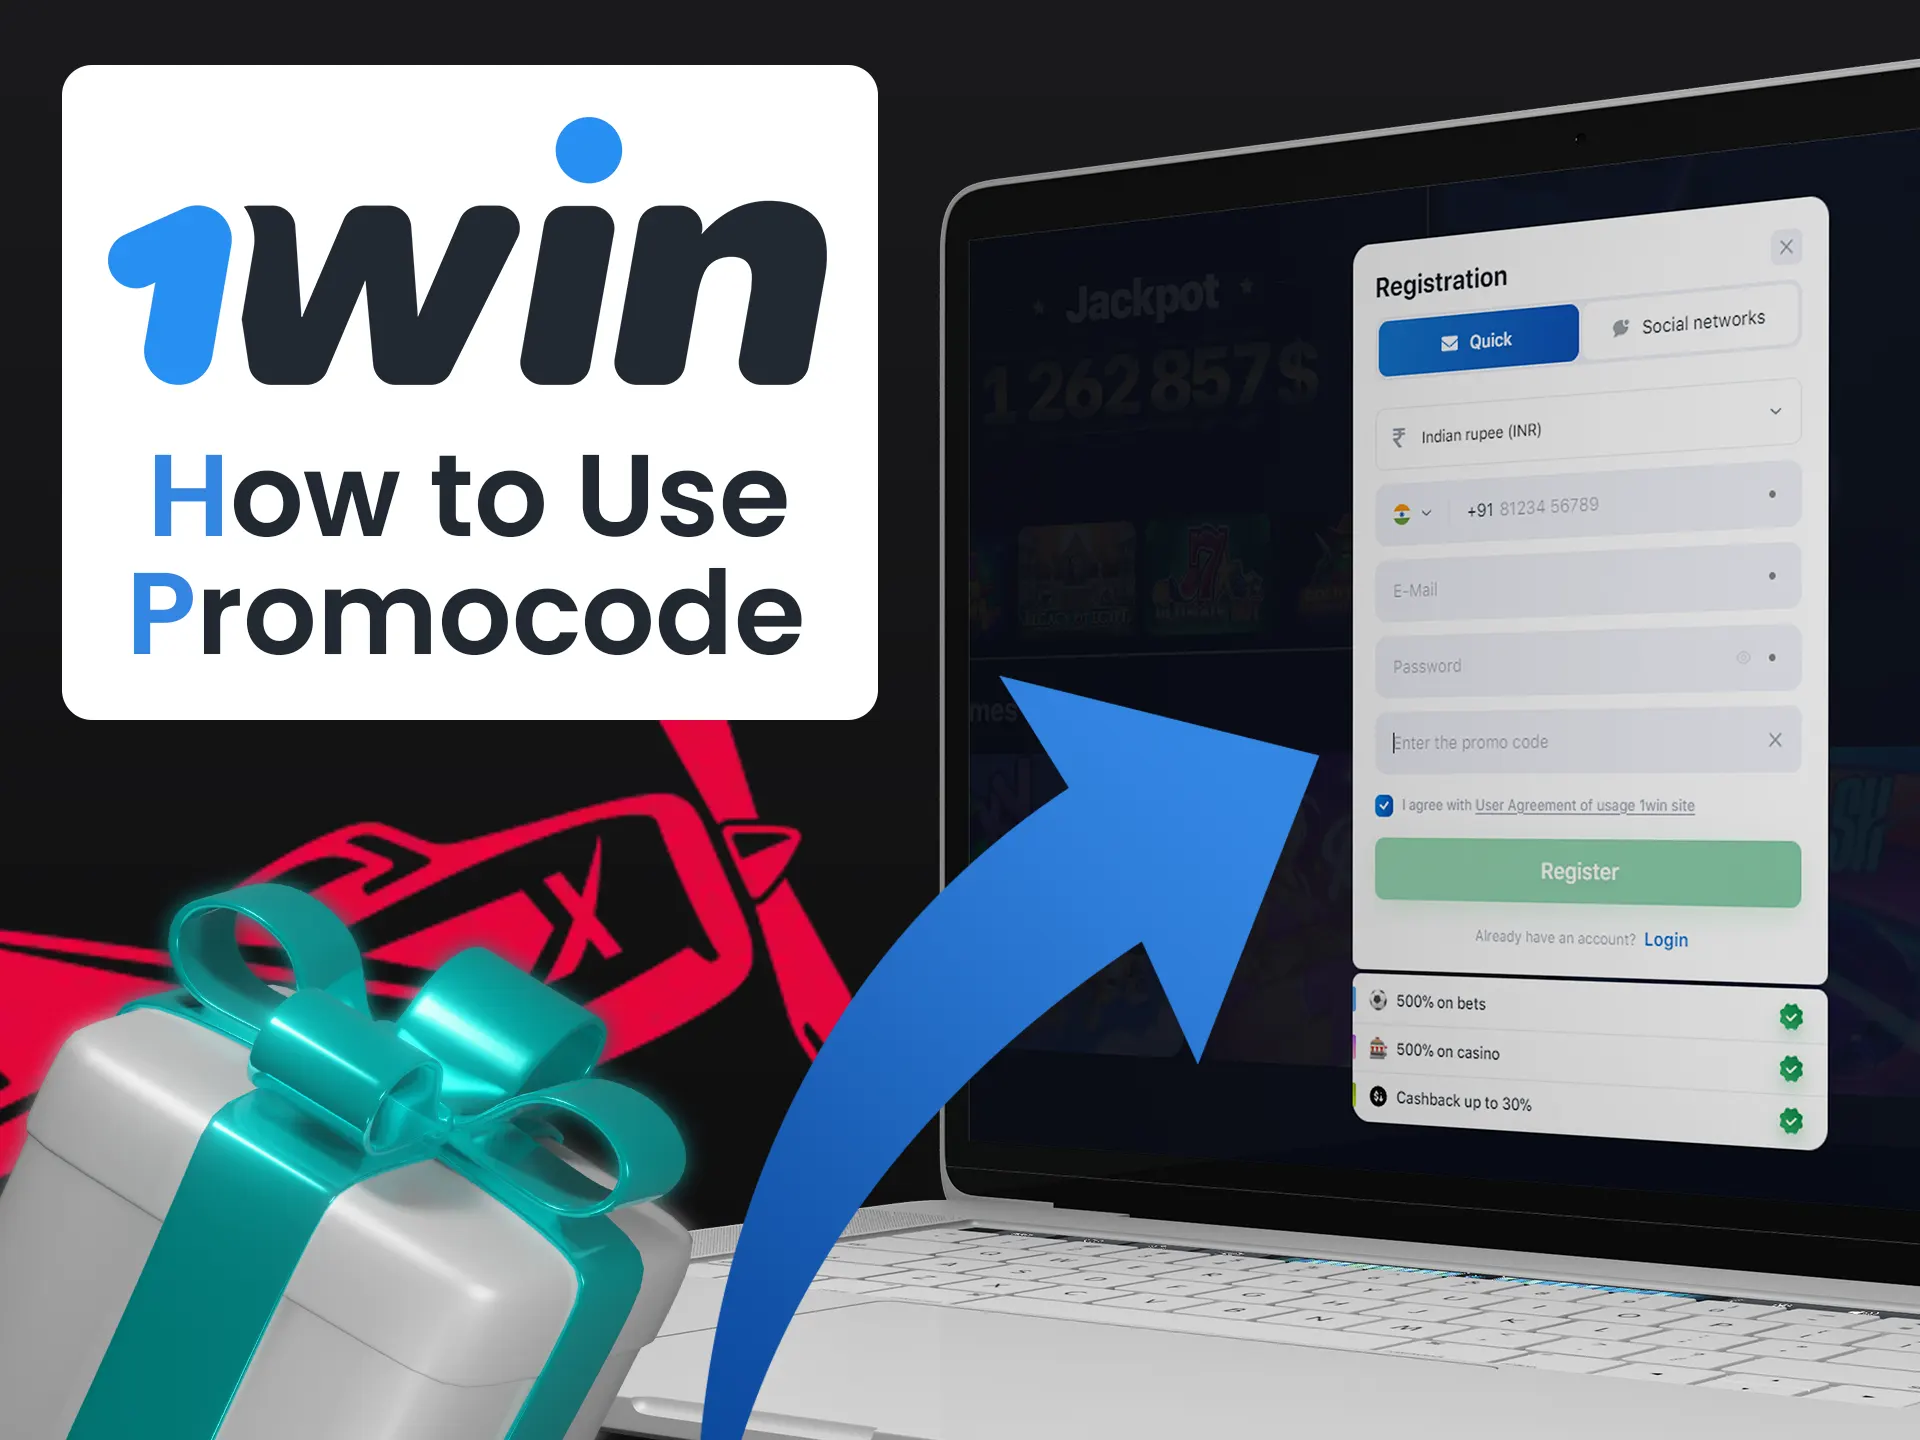 It's easy to use special 1win promocode.